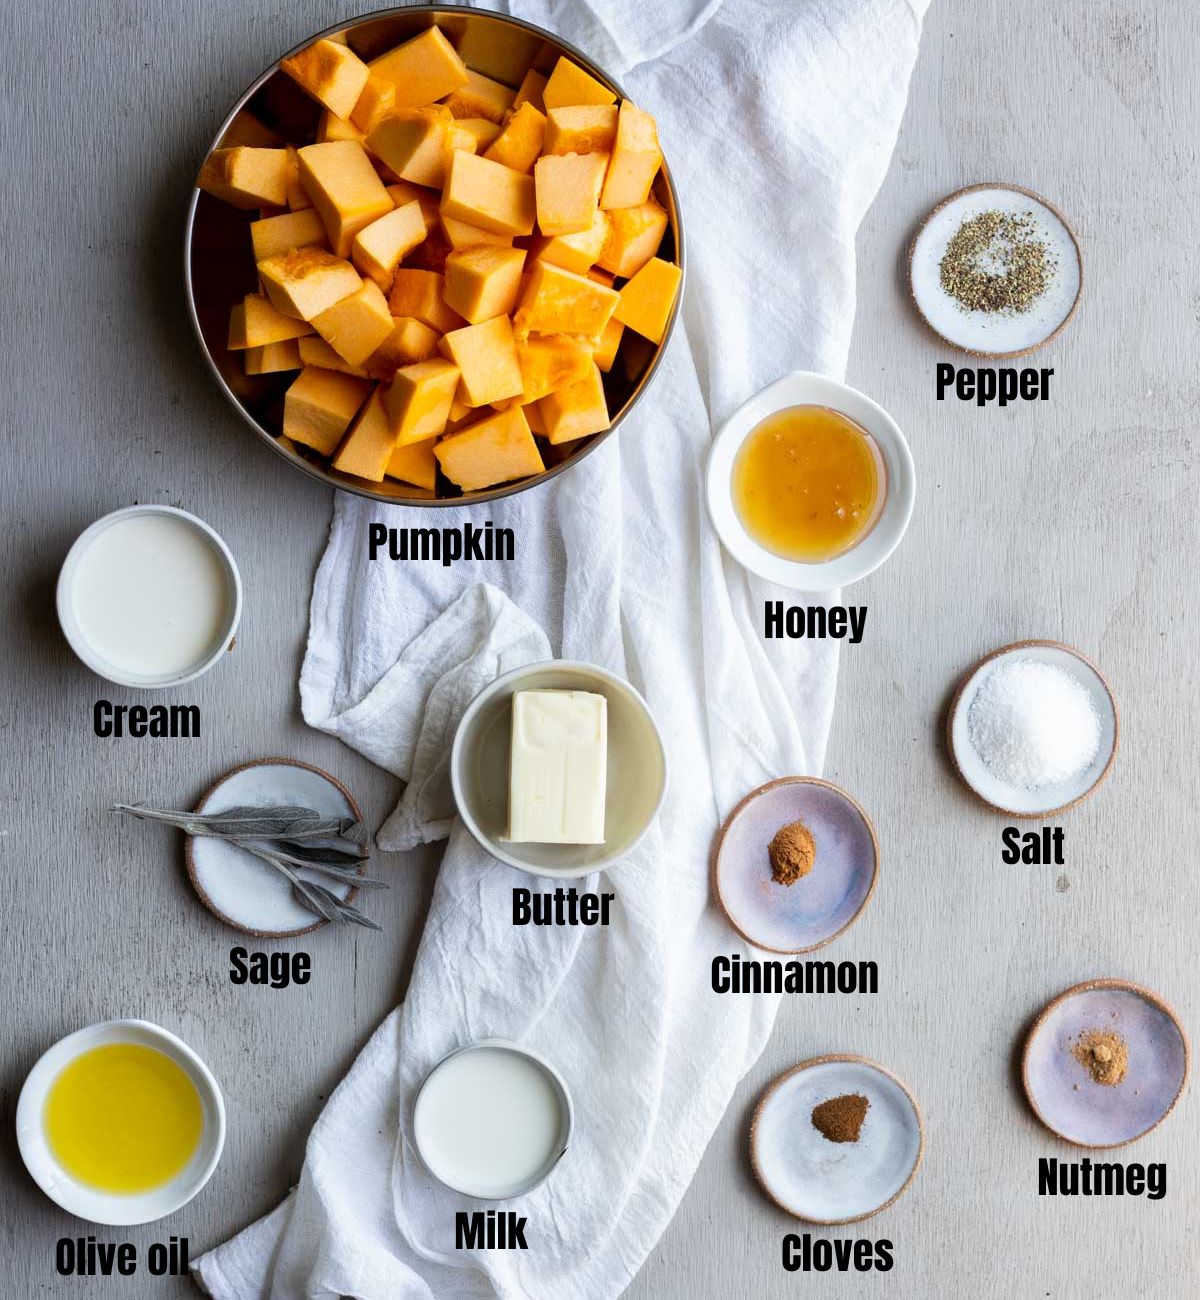 Ingredients to make mashed pumpkin arranged in individual dishes and labeled.